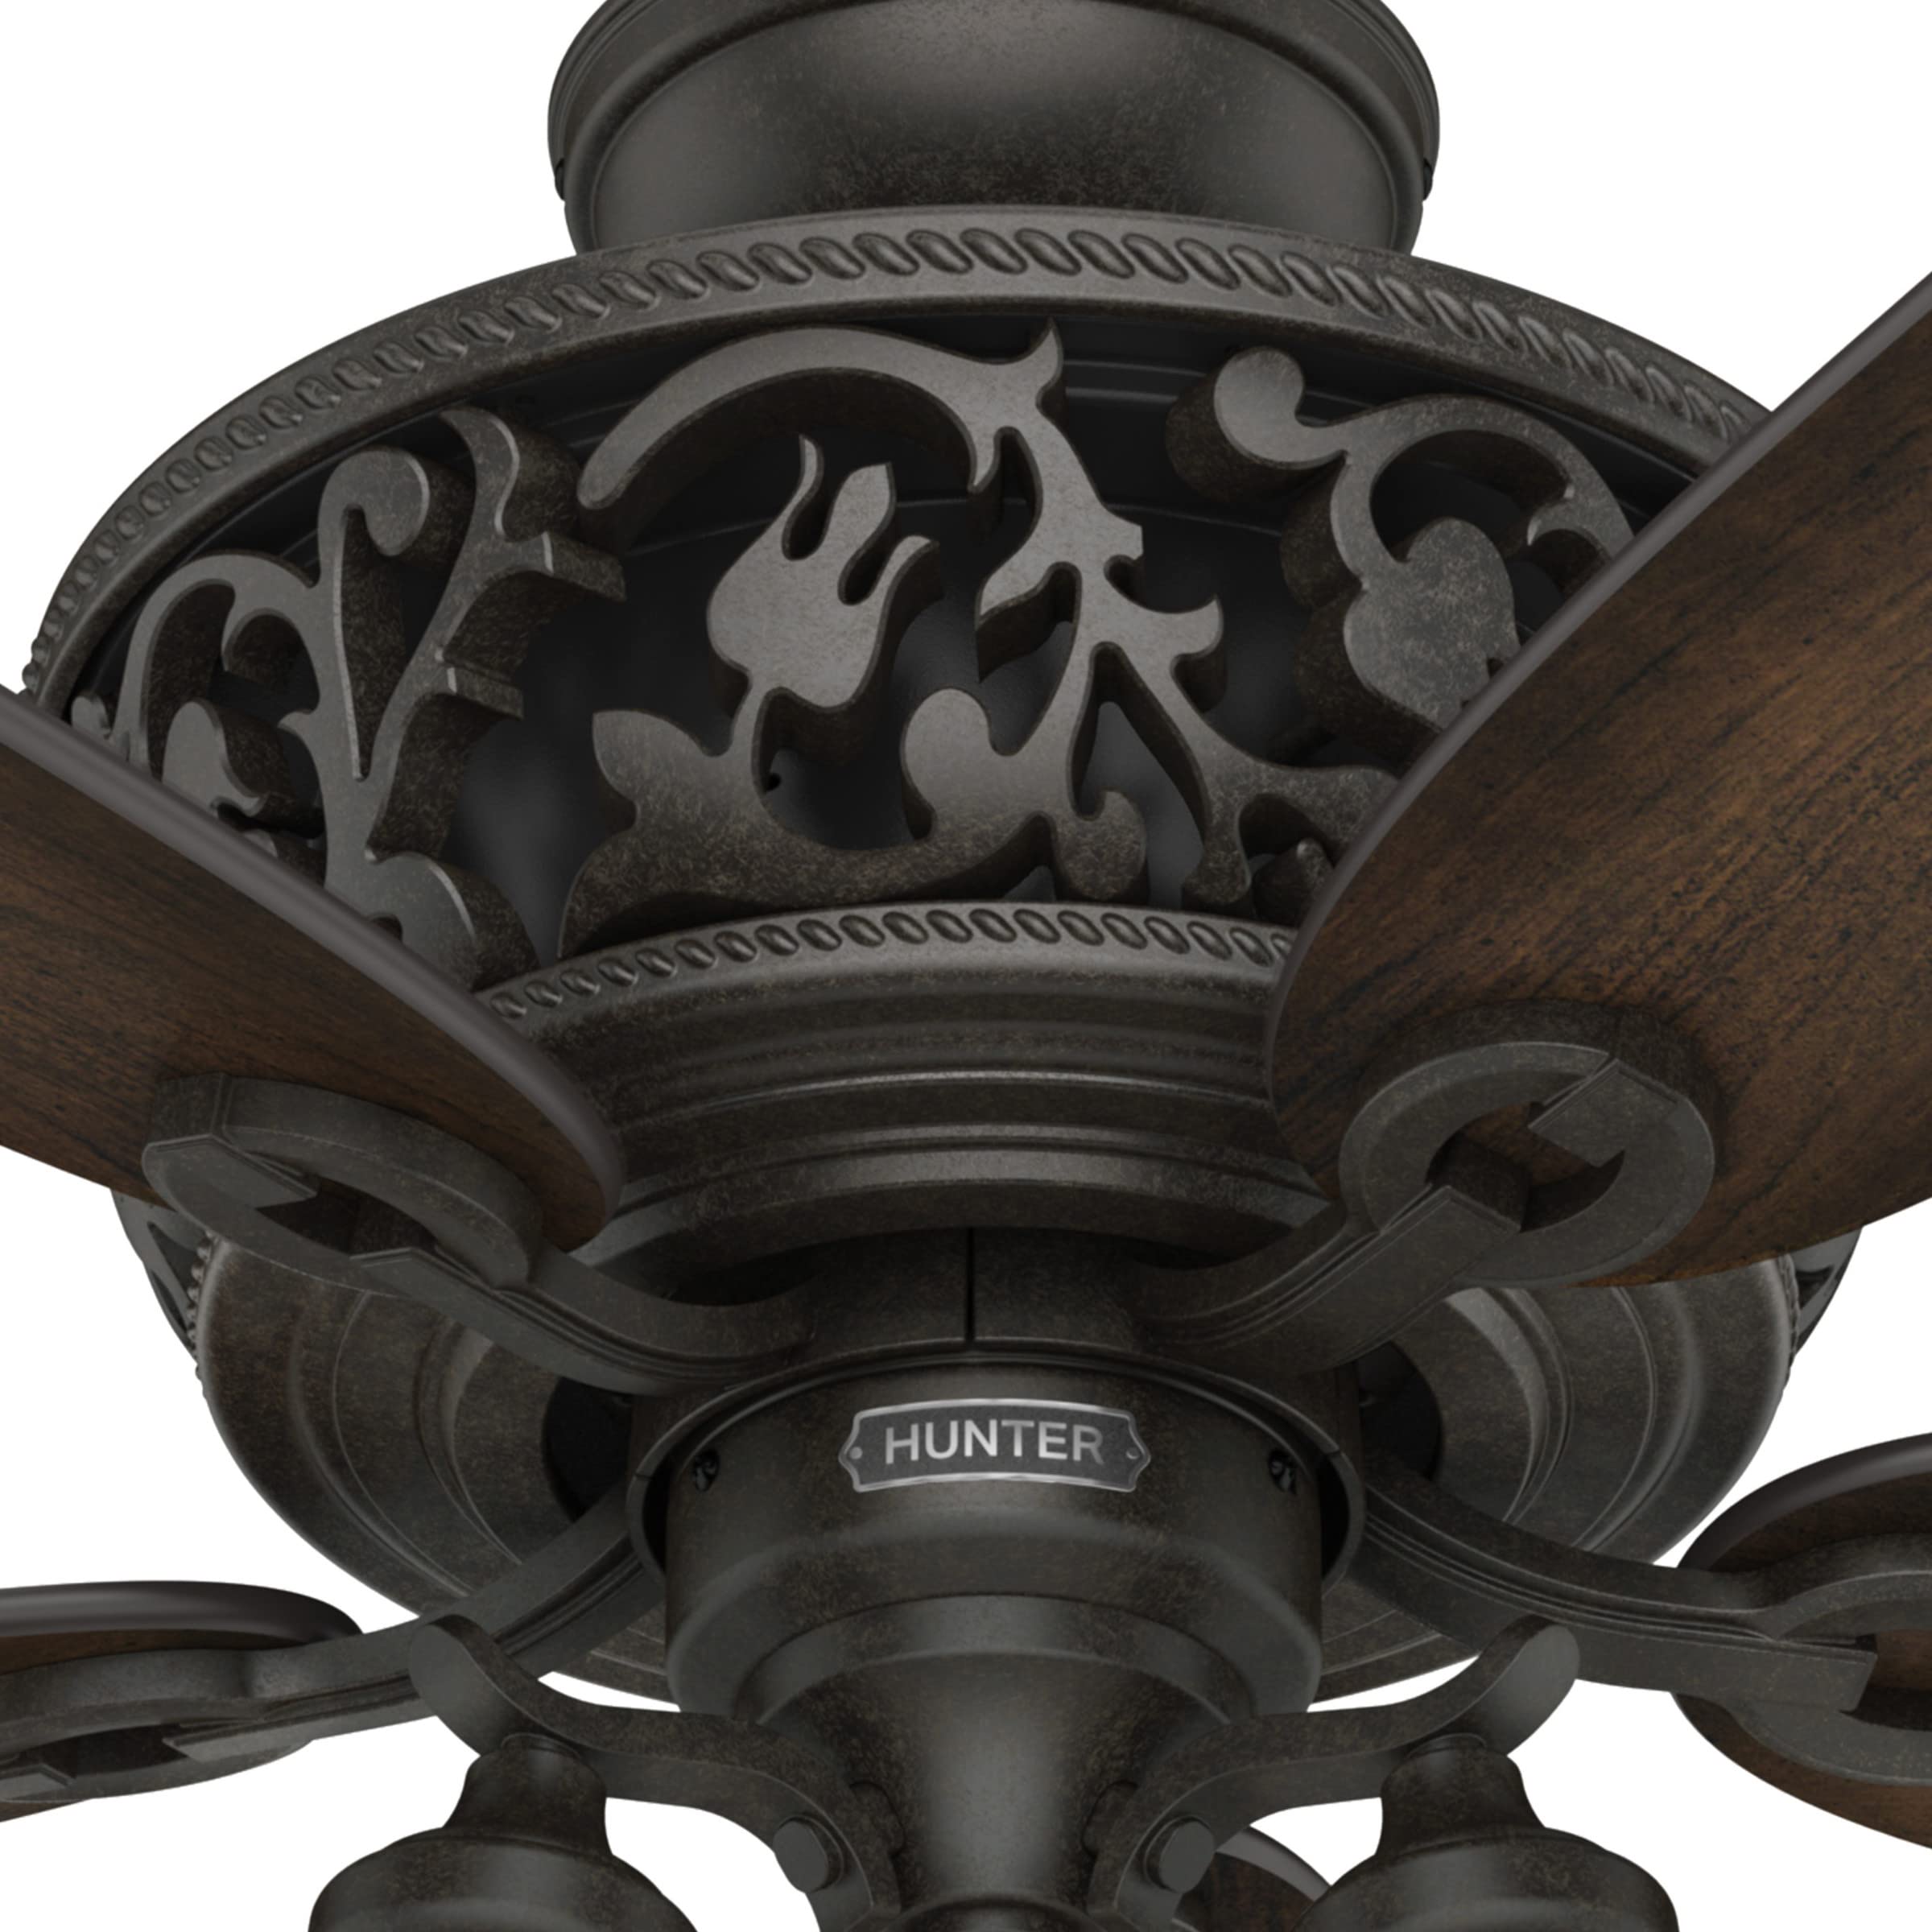 Hunter Fan Company, 59546, 54 inch Promenade Brittany Bronze Ceiling Fan with LED Light Kit and Handheld Remote